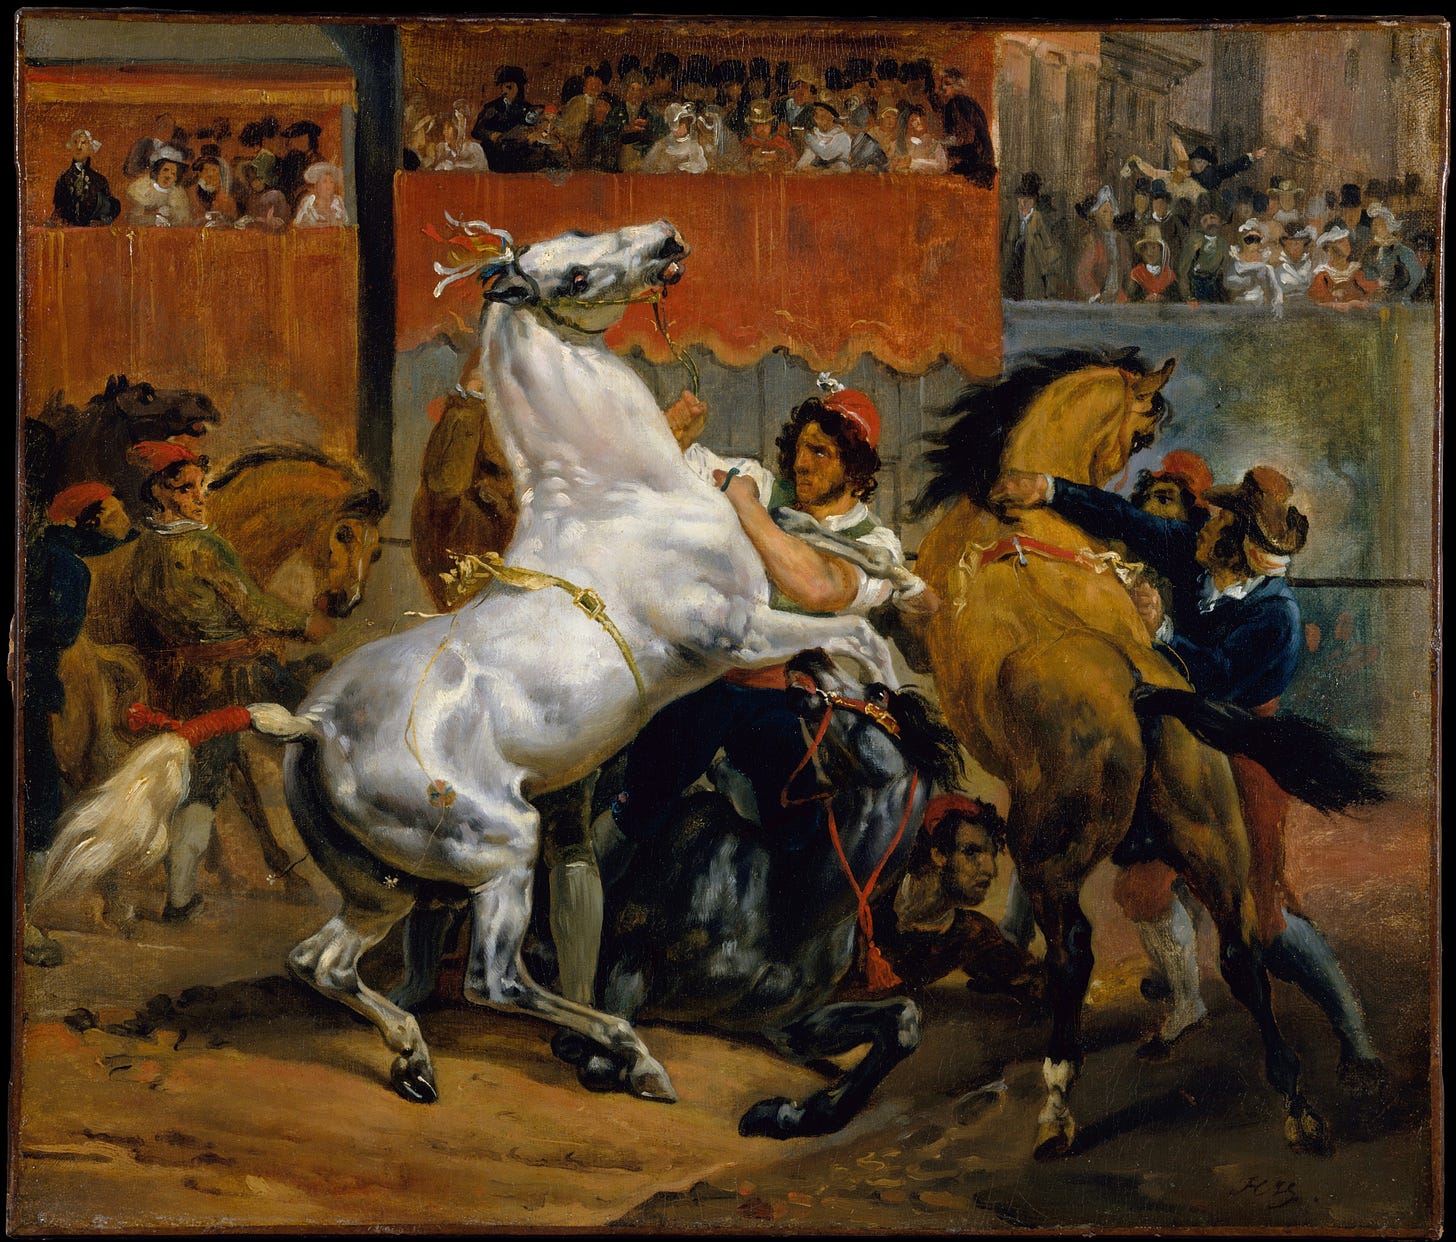 The Start of the Race of the Riderless Horses 1820 by Horace Vernet.